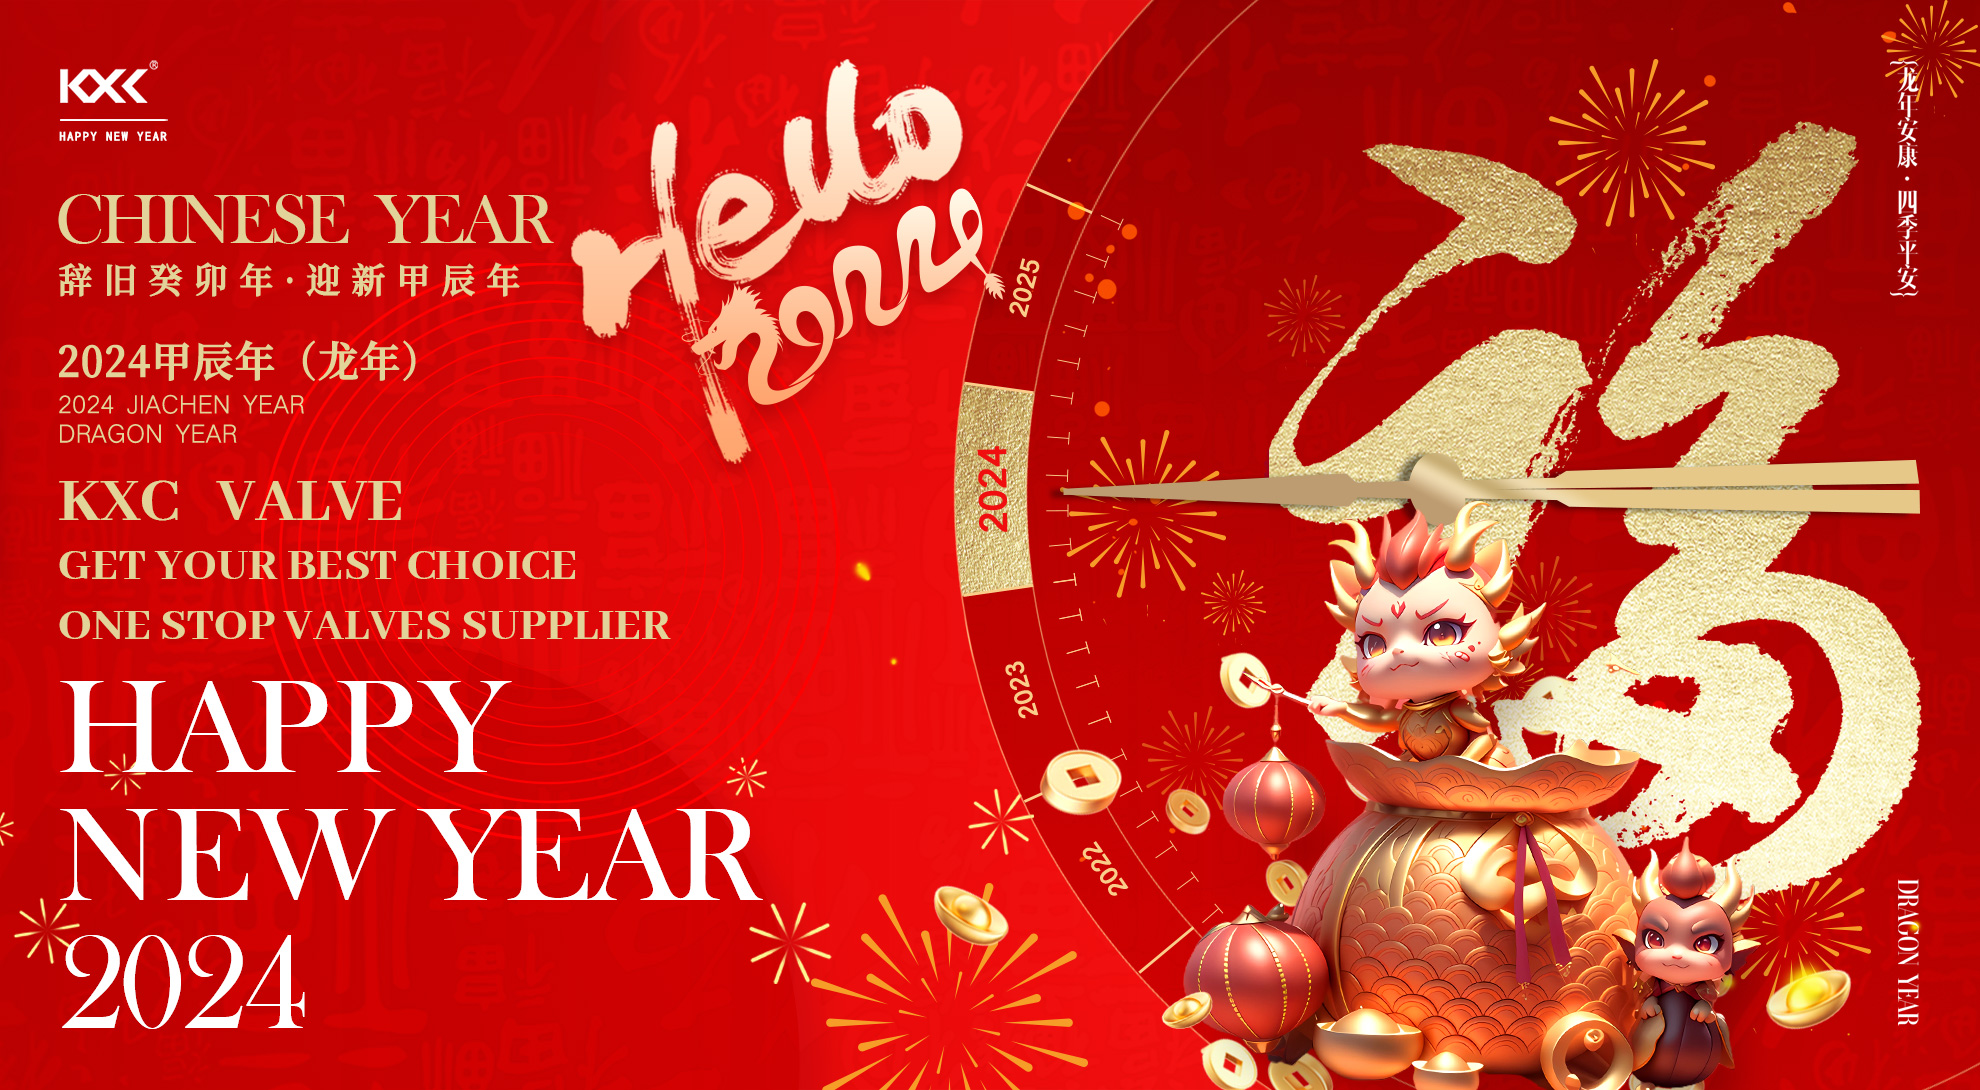 Tianjin KXC Wishes you a Happy Chinese New Year!